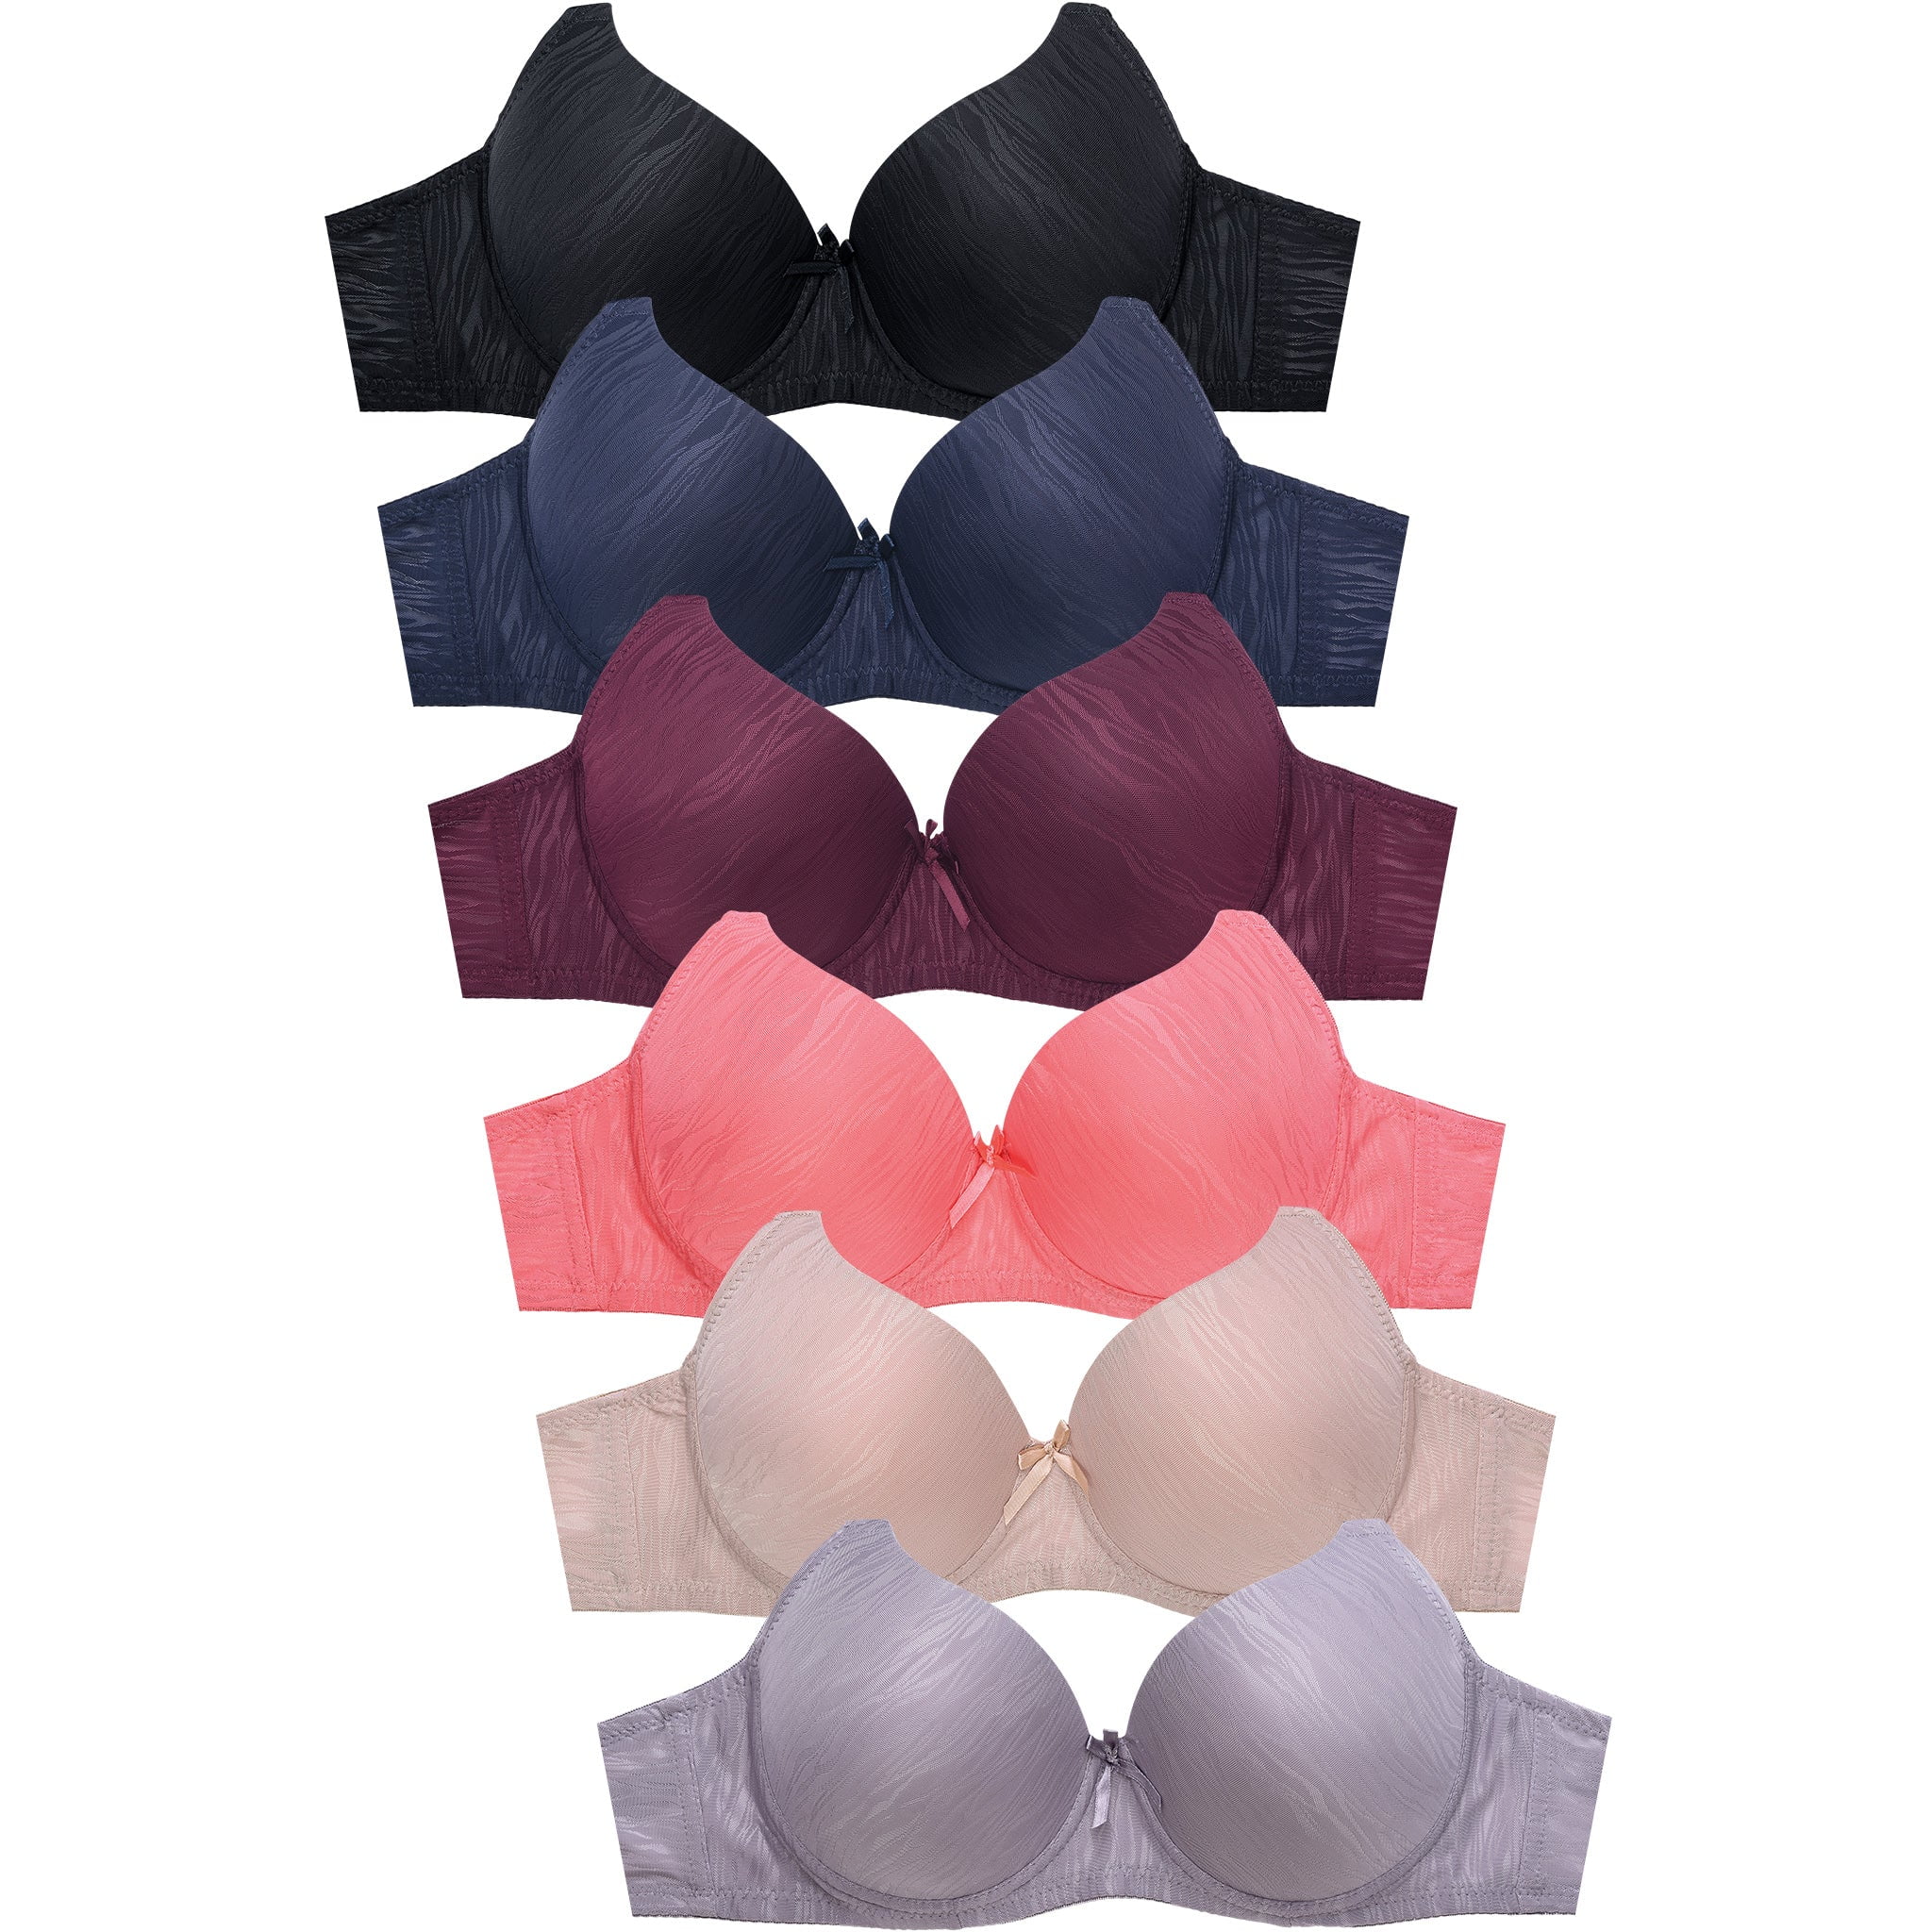 247 Frenzy Women's Essentials Sofra or Mamia PACK OF 6 PLUS Full Coverage  Solid Bras - D Cups 